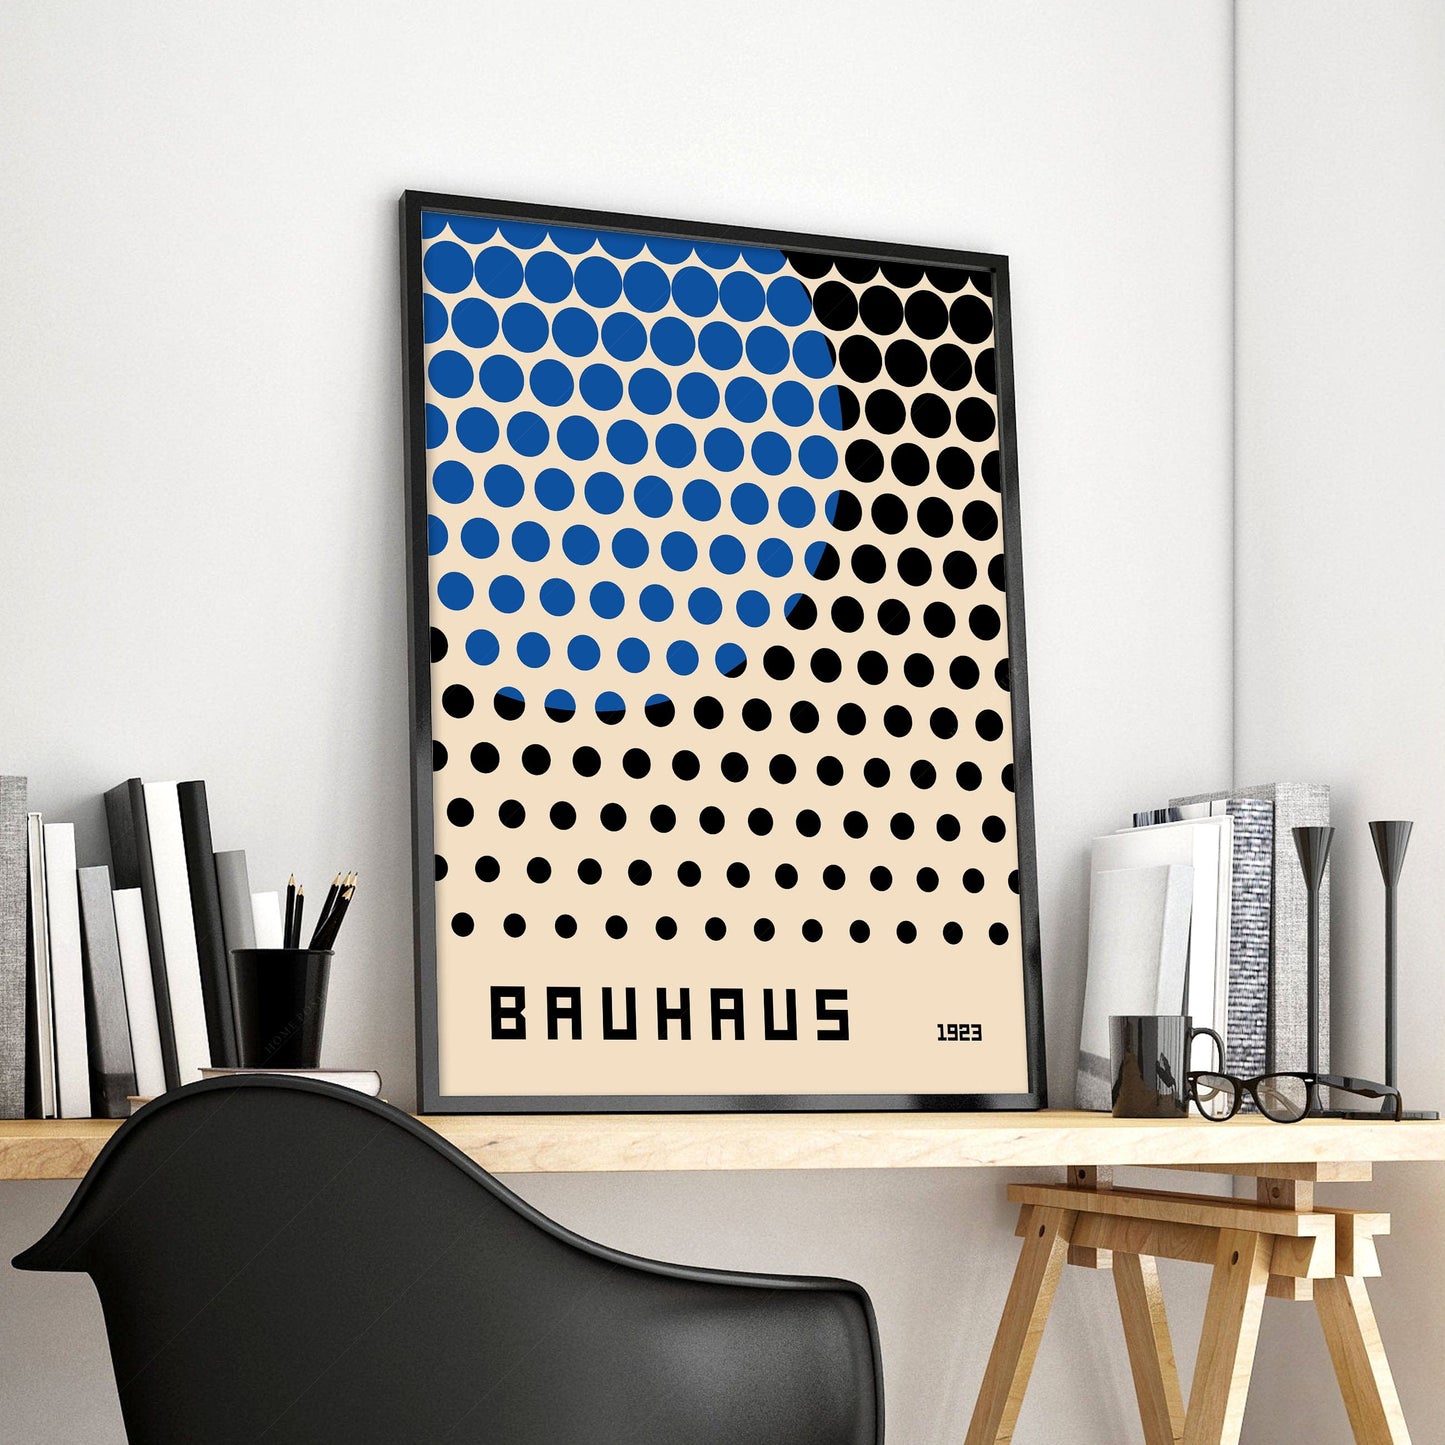 Home Poster Decor Single Mid Century Geometric Print: Abstract Wall Decor with Bauhaus and Museum Poster Aesthetics | Perfect for Office Decor and Art Exhibition